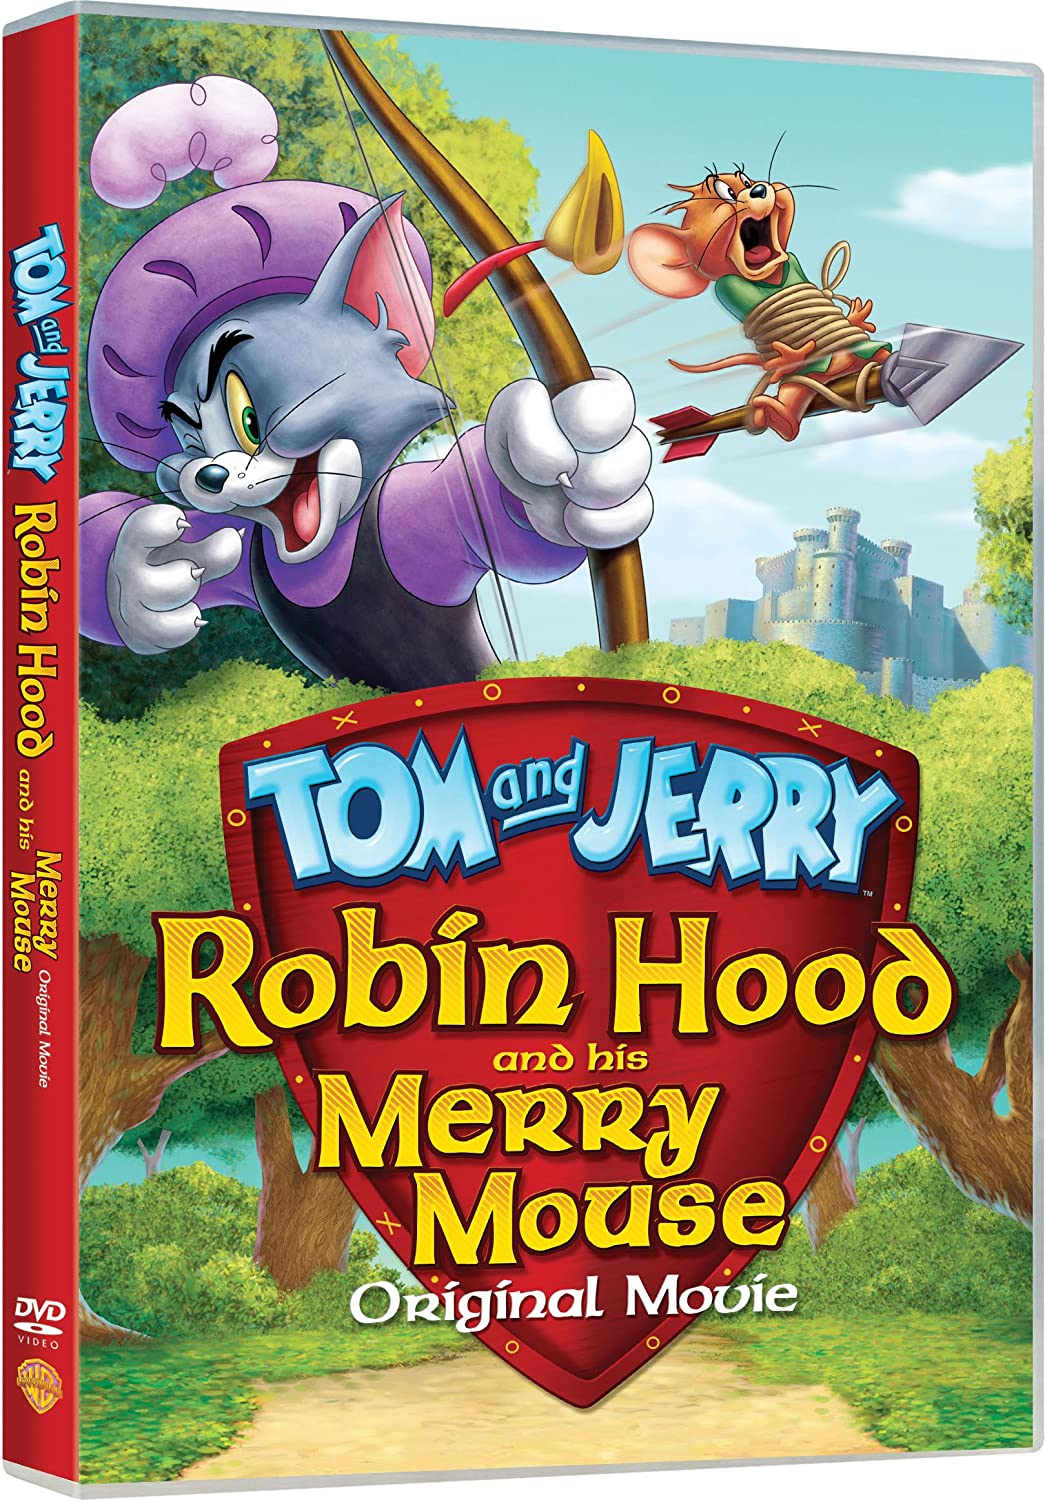 Tom And Jerry: Robin Hood and His Merry Mouse [2012] - Family/Musical [DVD]